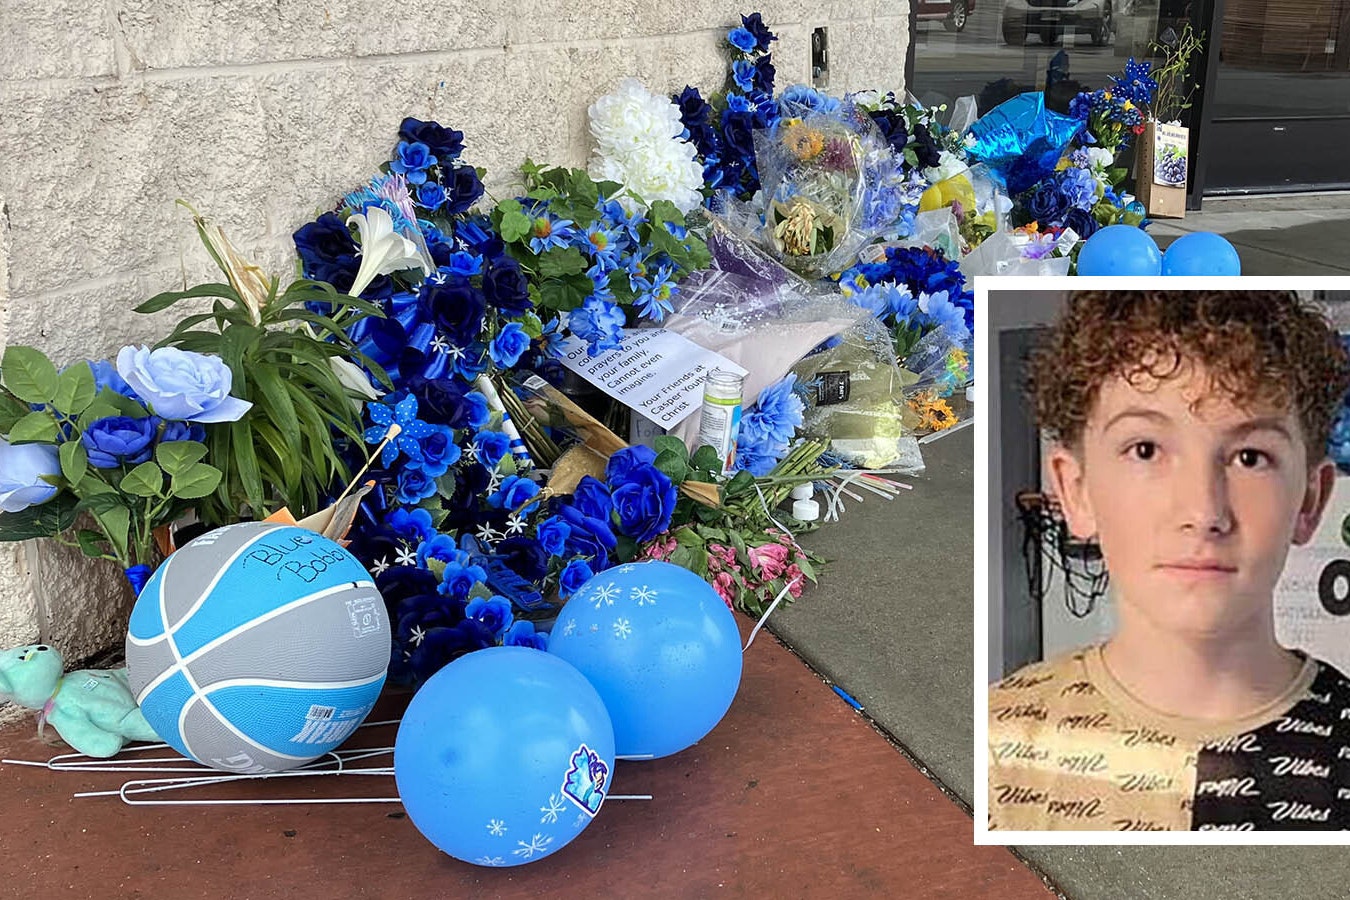 A memorial for Bobby Maher, the Casper 14-year-old who died after being stabbed outside Eastridge Mall on April 7, grows near the spot of the altercation. Maher's favorite color was blue.